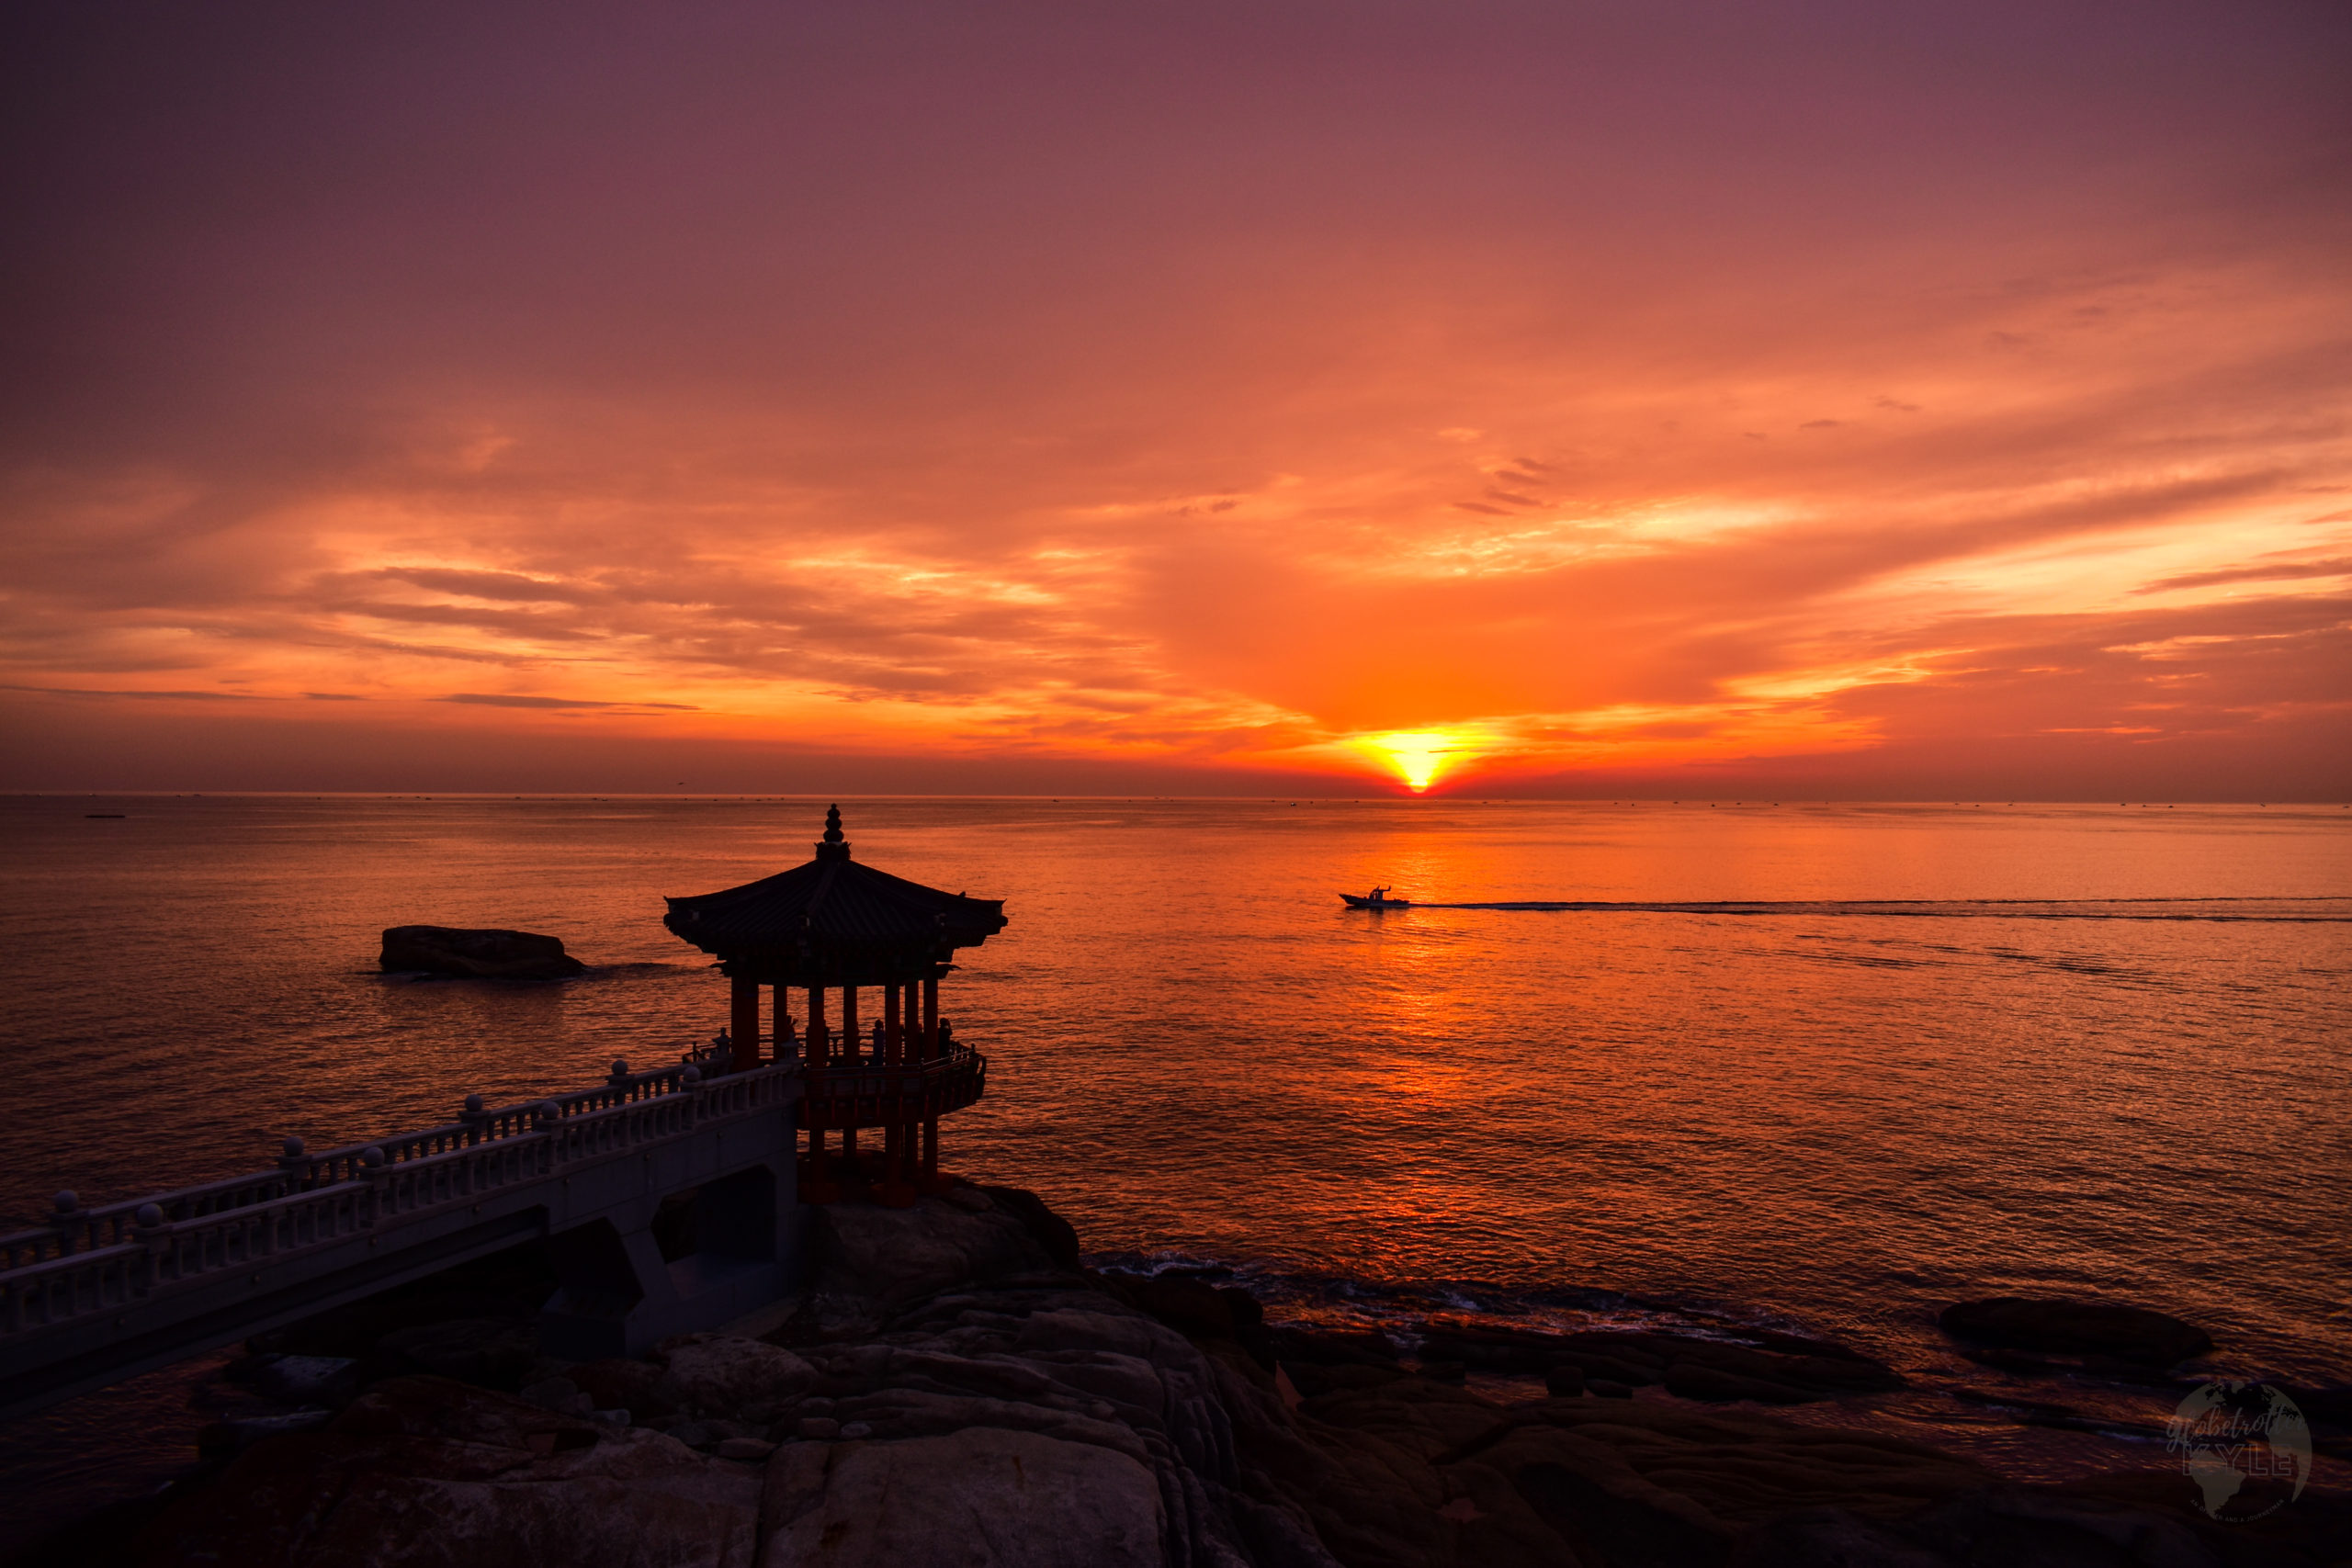 sunrise over the ocean with a silhouette of korean temple architecture appears in the foreground at Yonggeumjeong Sunrise Pavilion